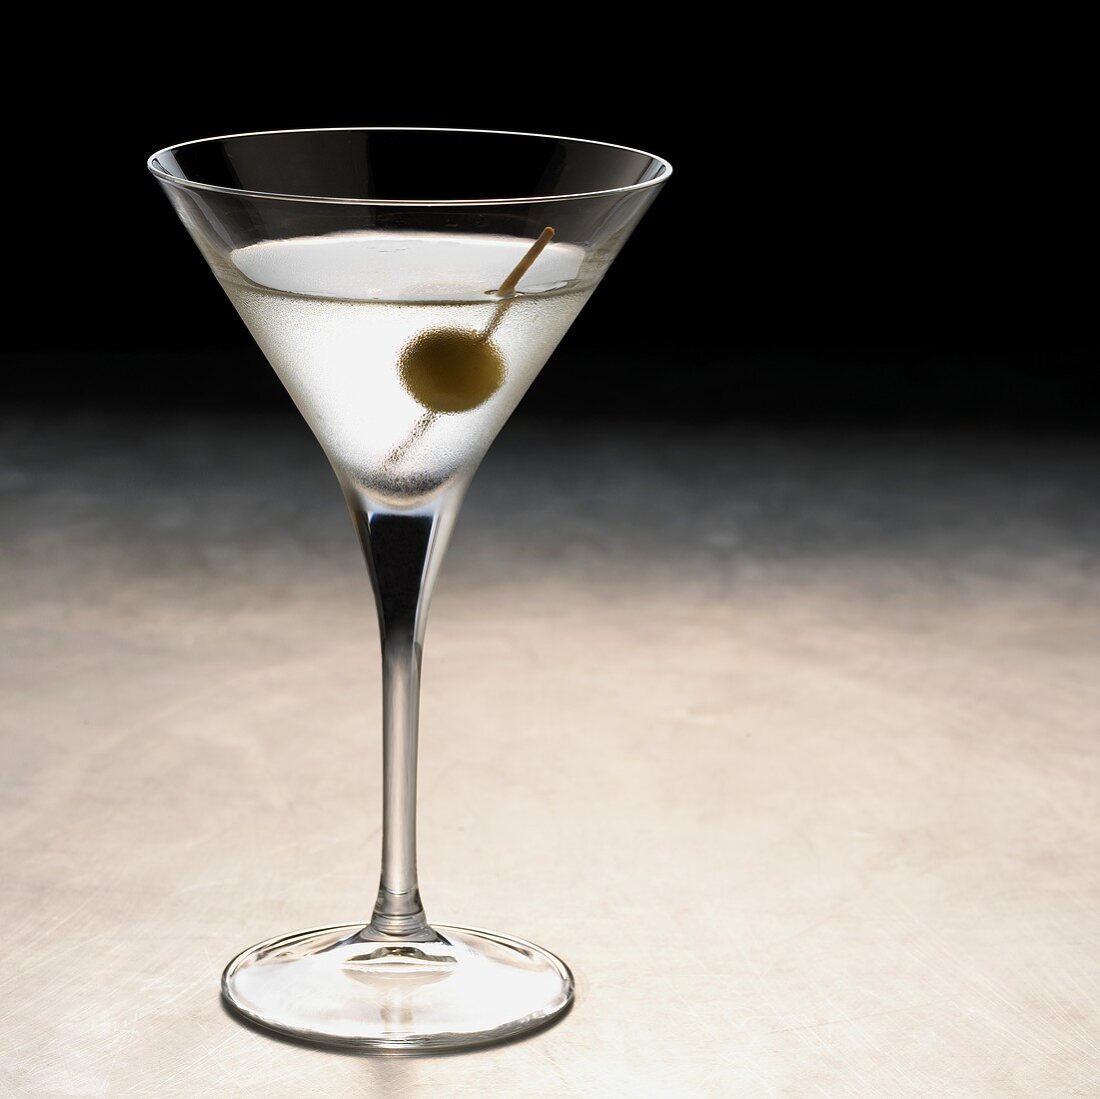 A glass of Martini with a green olive